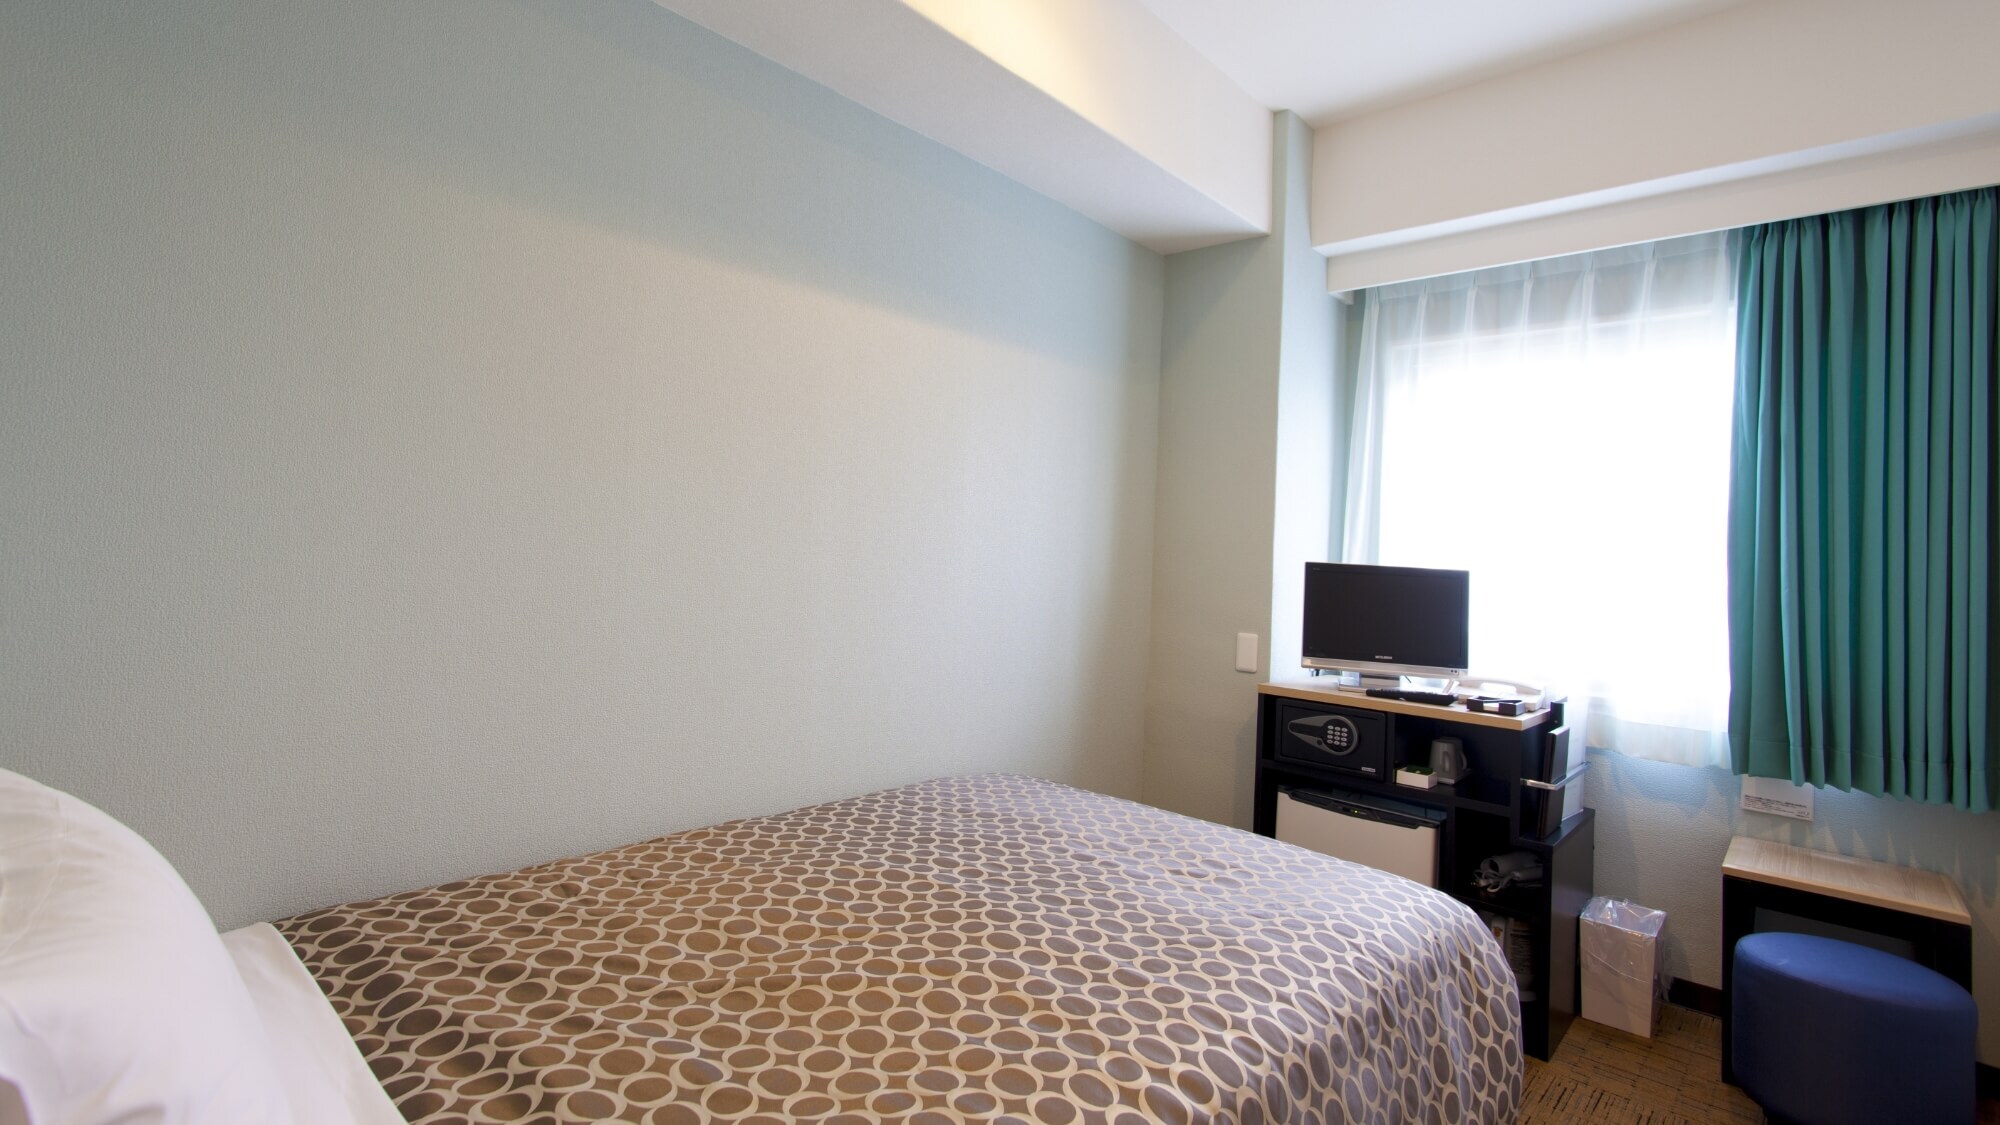  [EAST TOWER] Semi-double room (12 square meters)